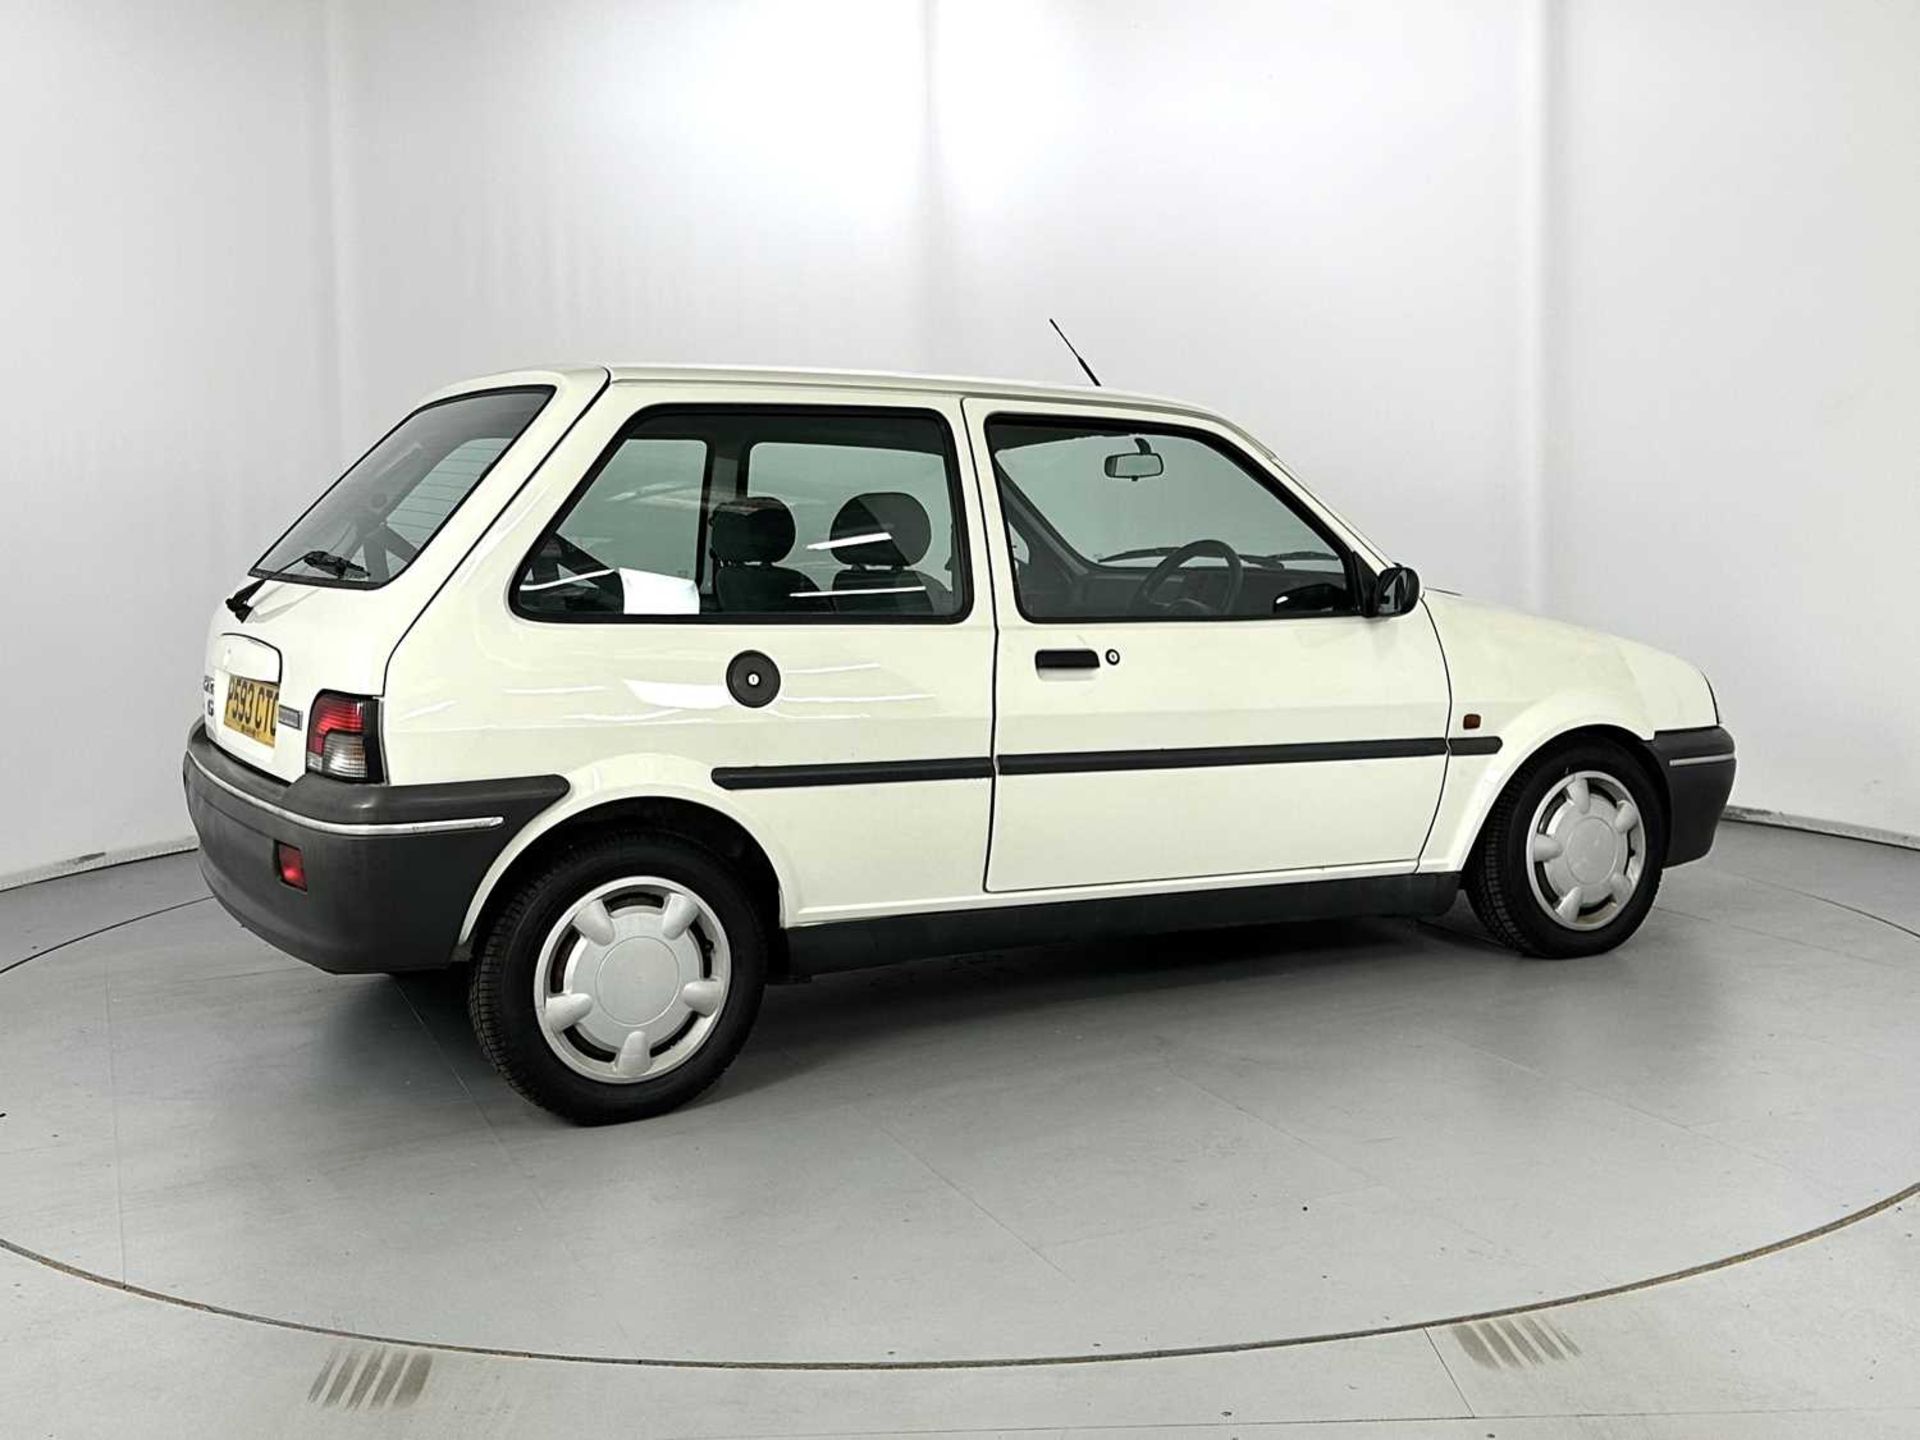 1996 Rover Metro - NO RESERVE 13,000 miles! - Image 10 of 29